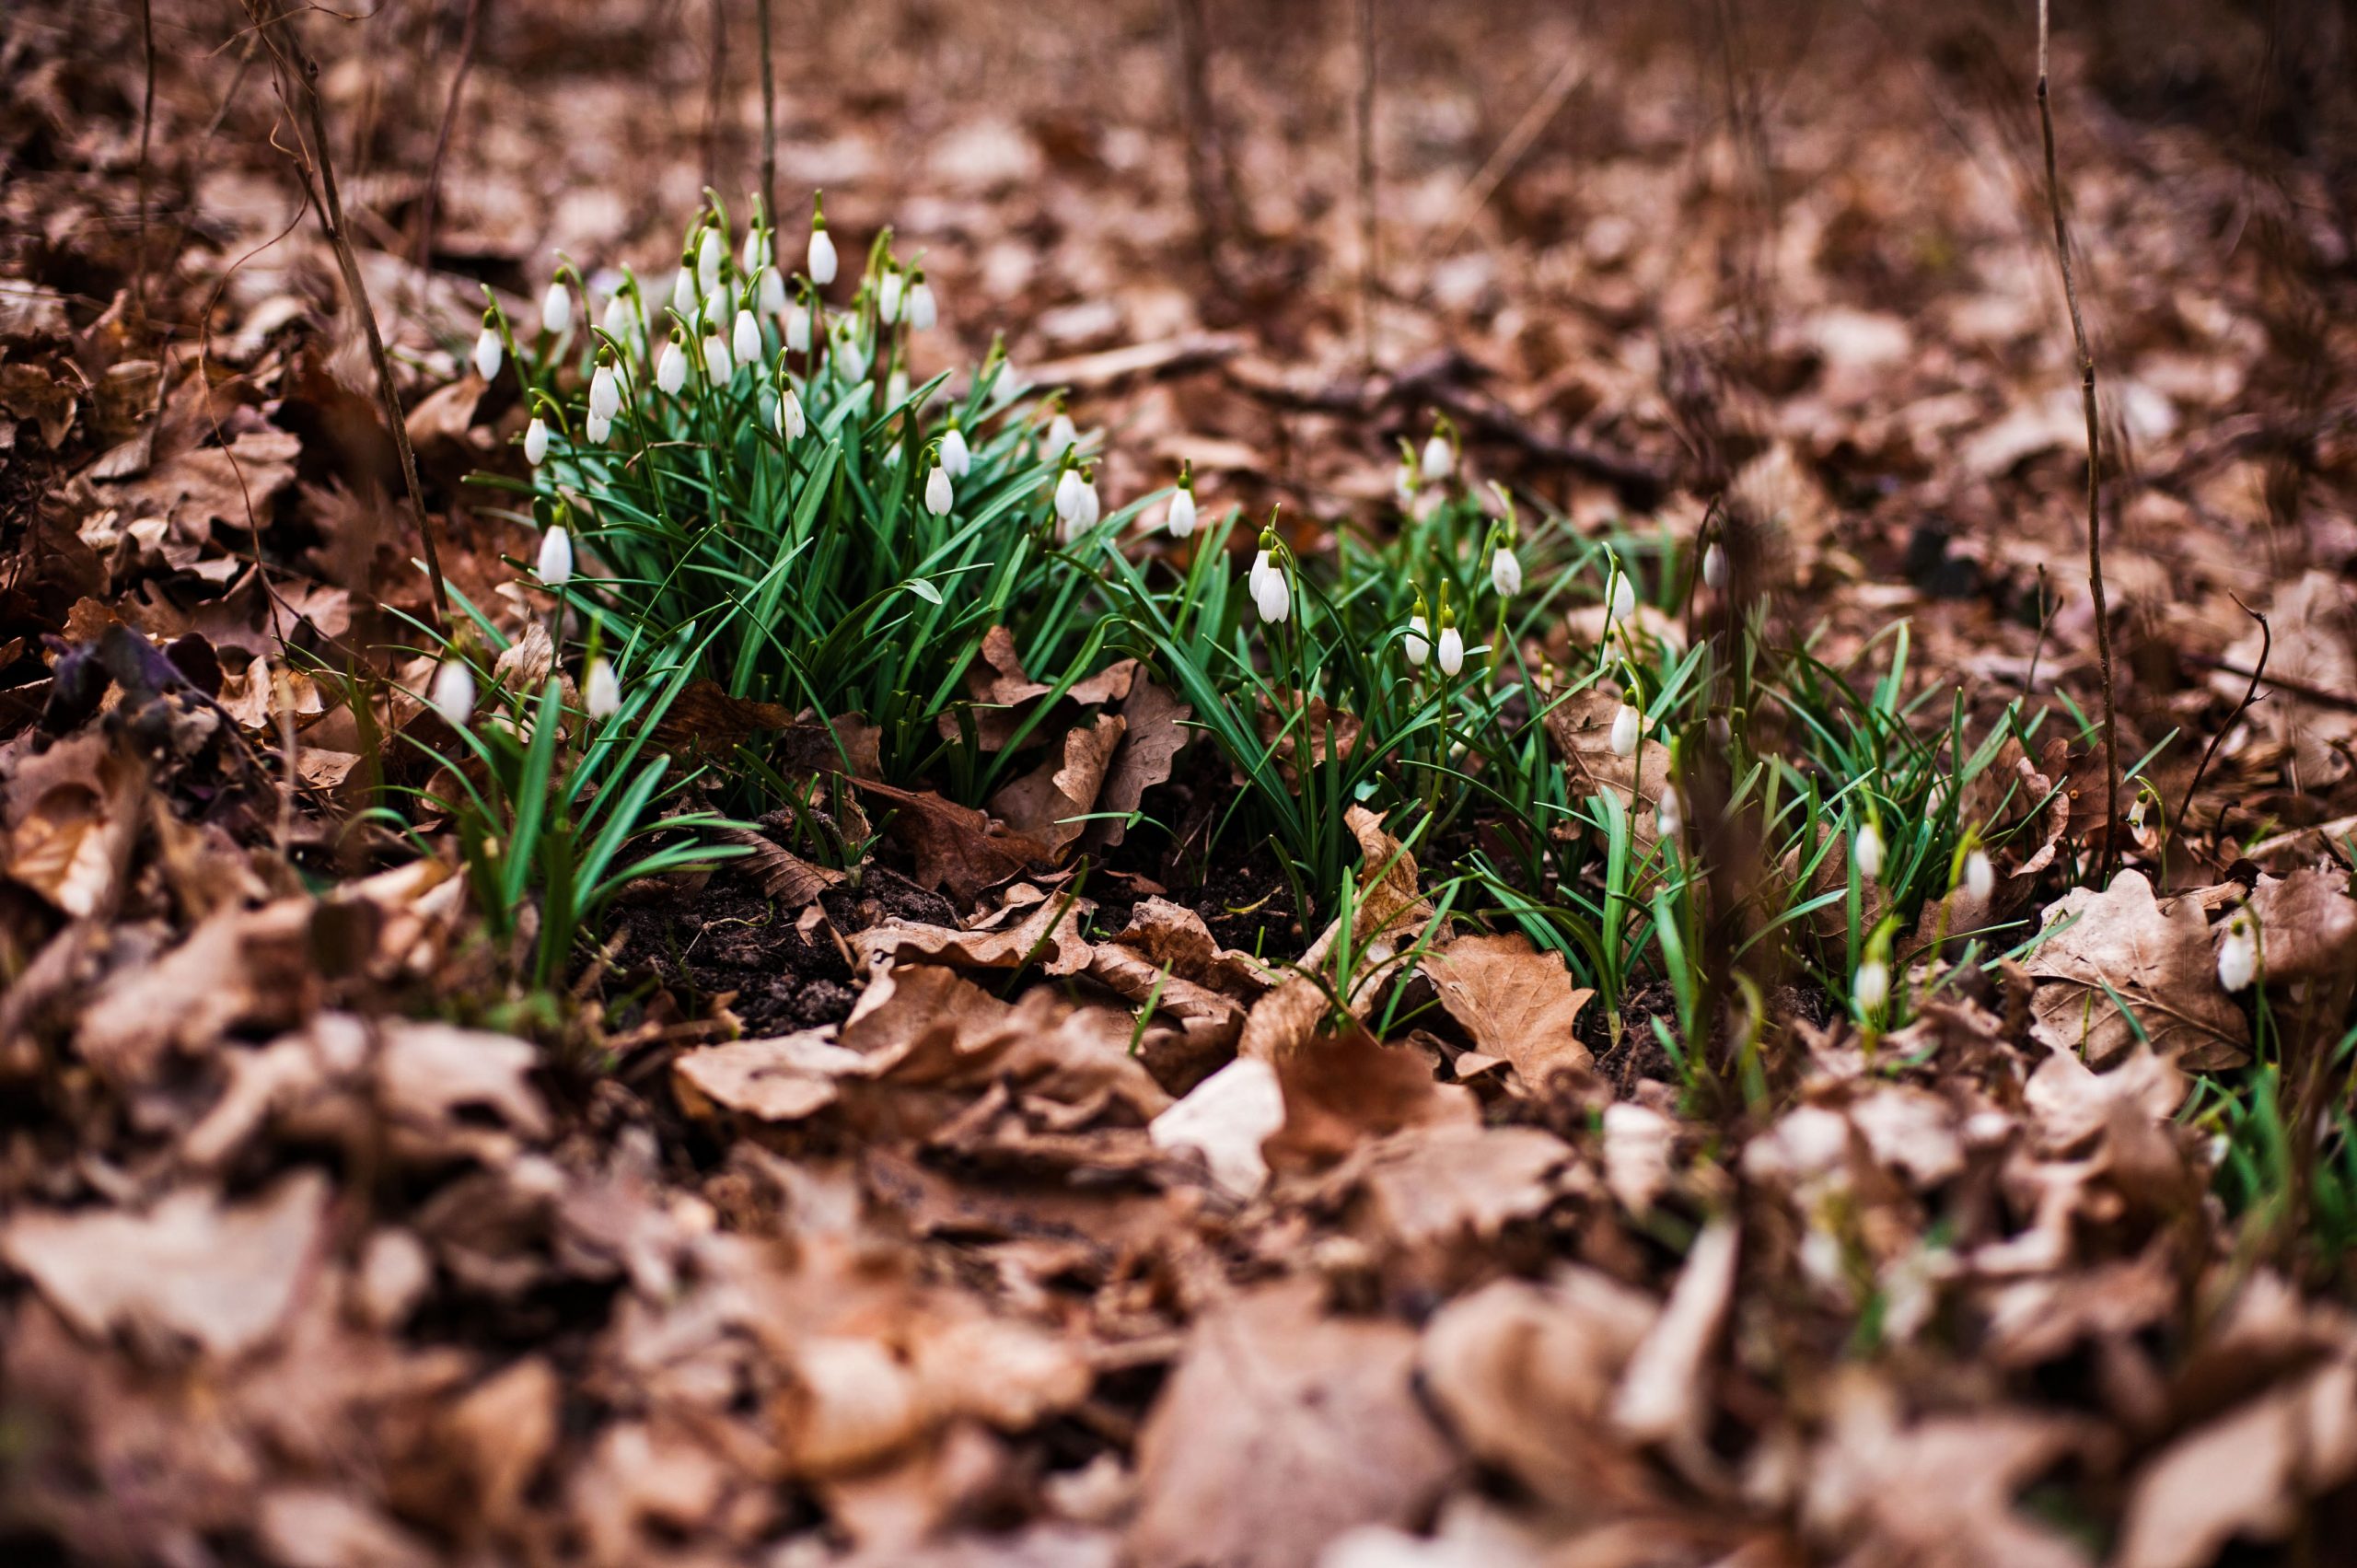 In an article about Imbolc, plants sprouting out of the ground